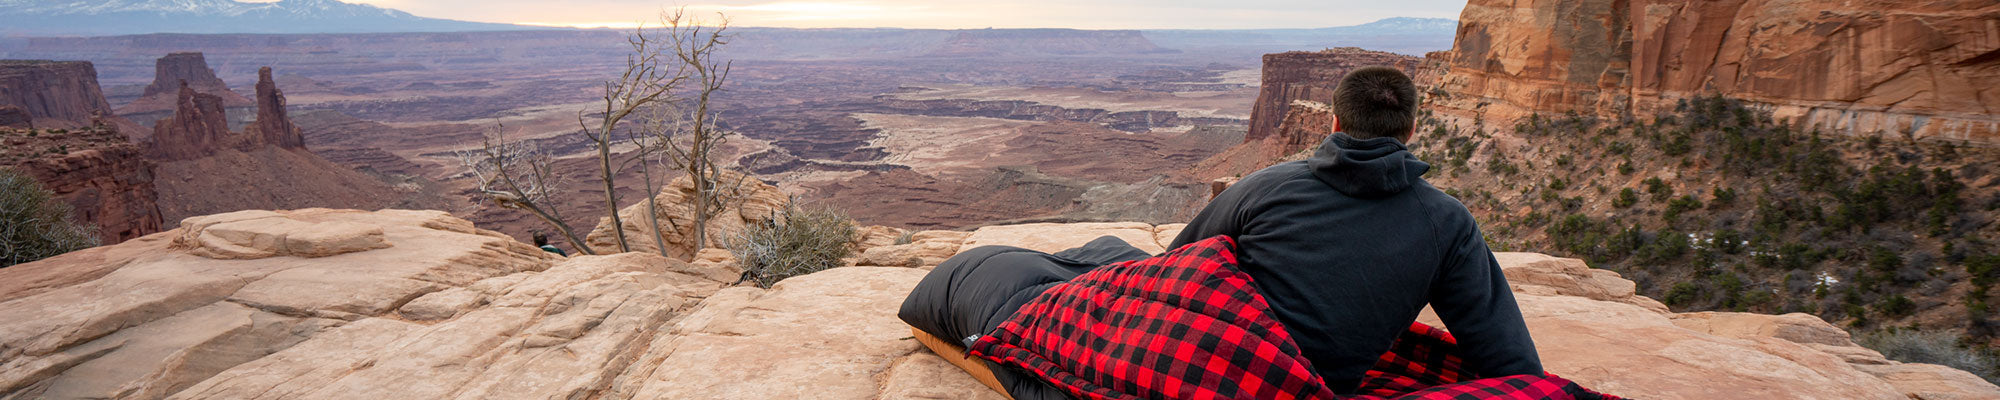 A man sits in his sleeping bag looking out at a scenic view.